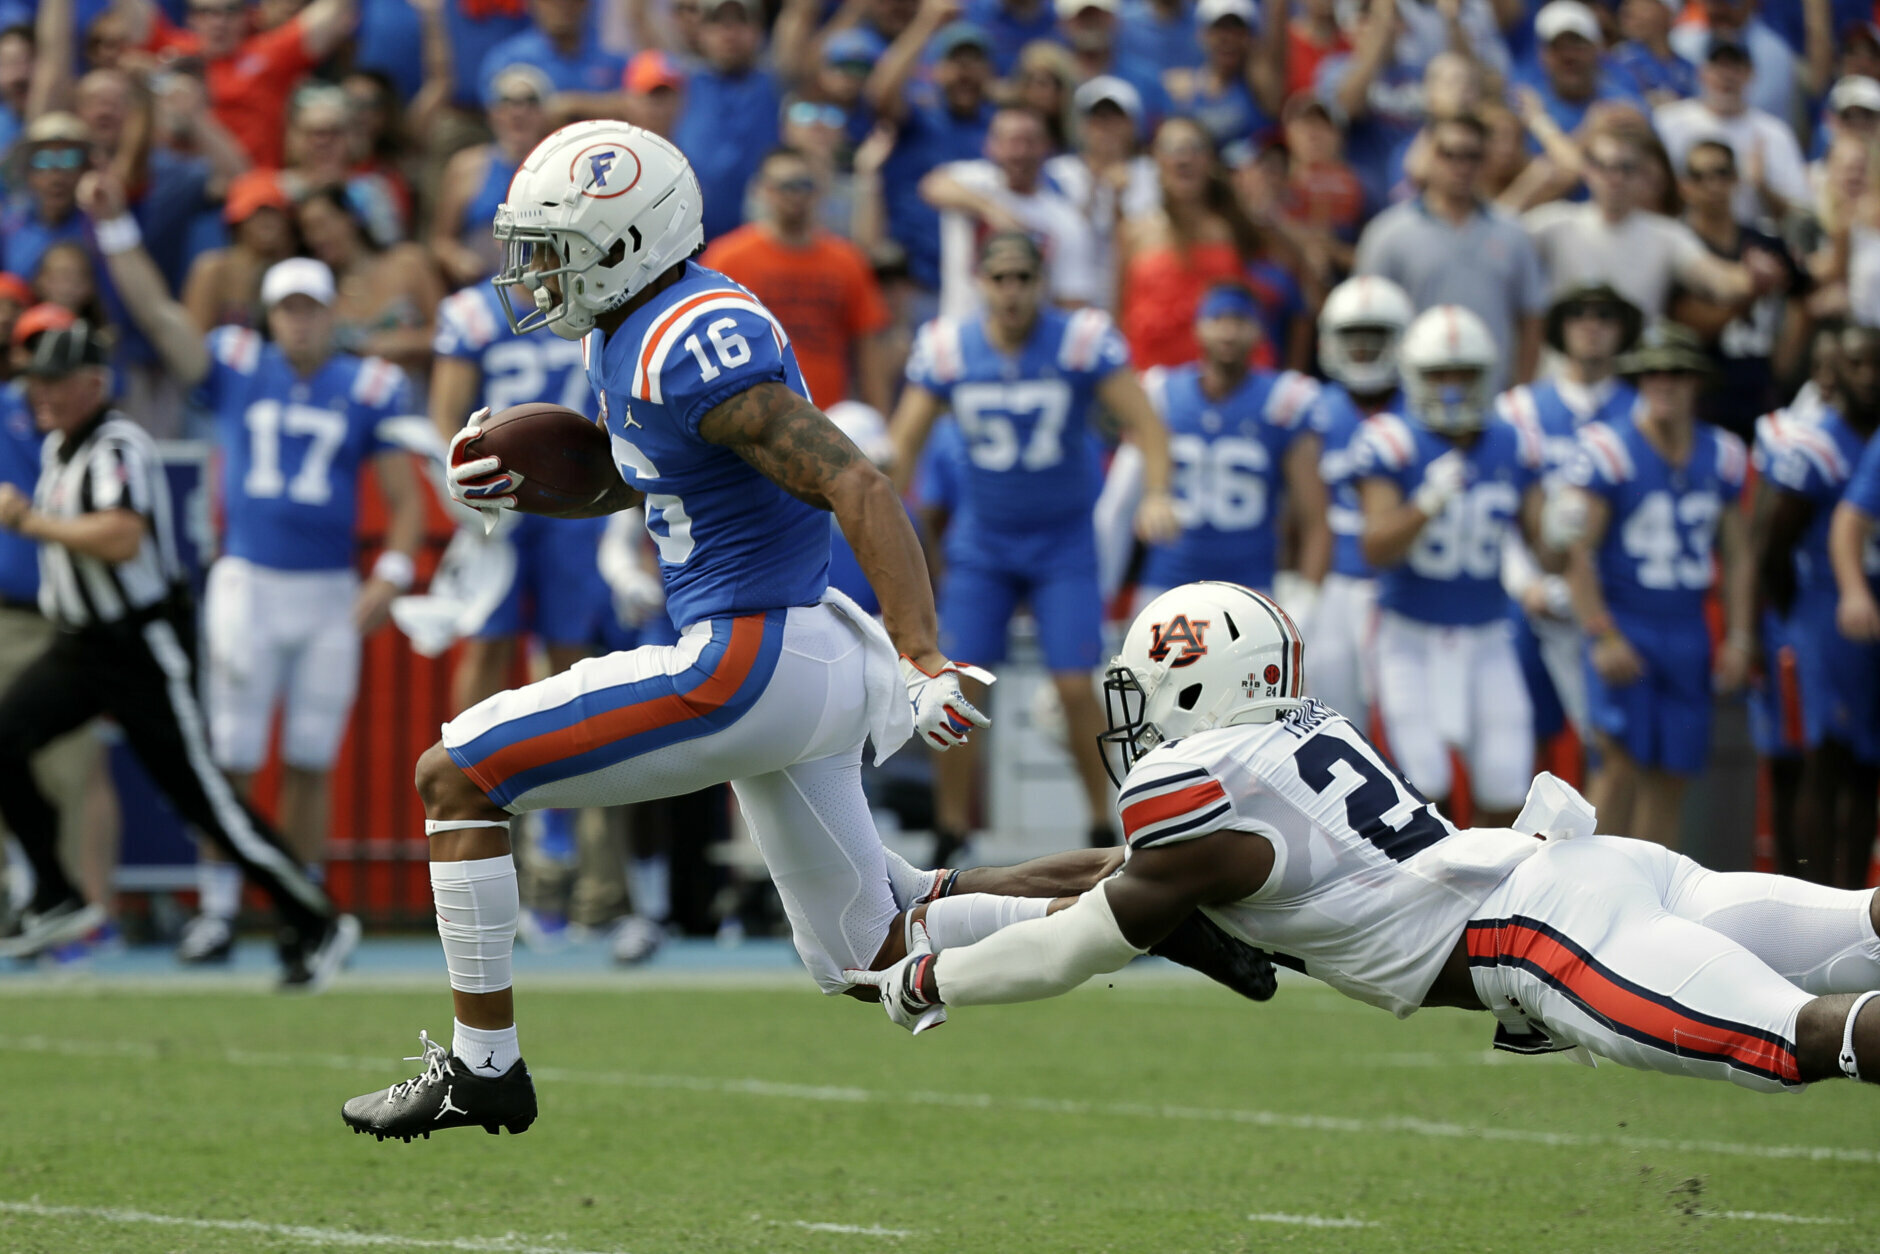 <p><b>Round 7 (229th overall) &#8211; WR Freddie Swain, Florida</b></p>
<p>This could be a good pick for the Redskins, even if they&#8217;ve already taken K.J. Hill. Swain is a speedier option in the slot, and even if he has to sit on the practice squad for a couple years, the &#8216;Skins can&#8217;t have too many good receiving options.</p>
